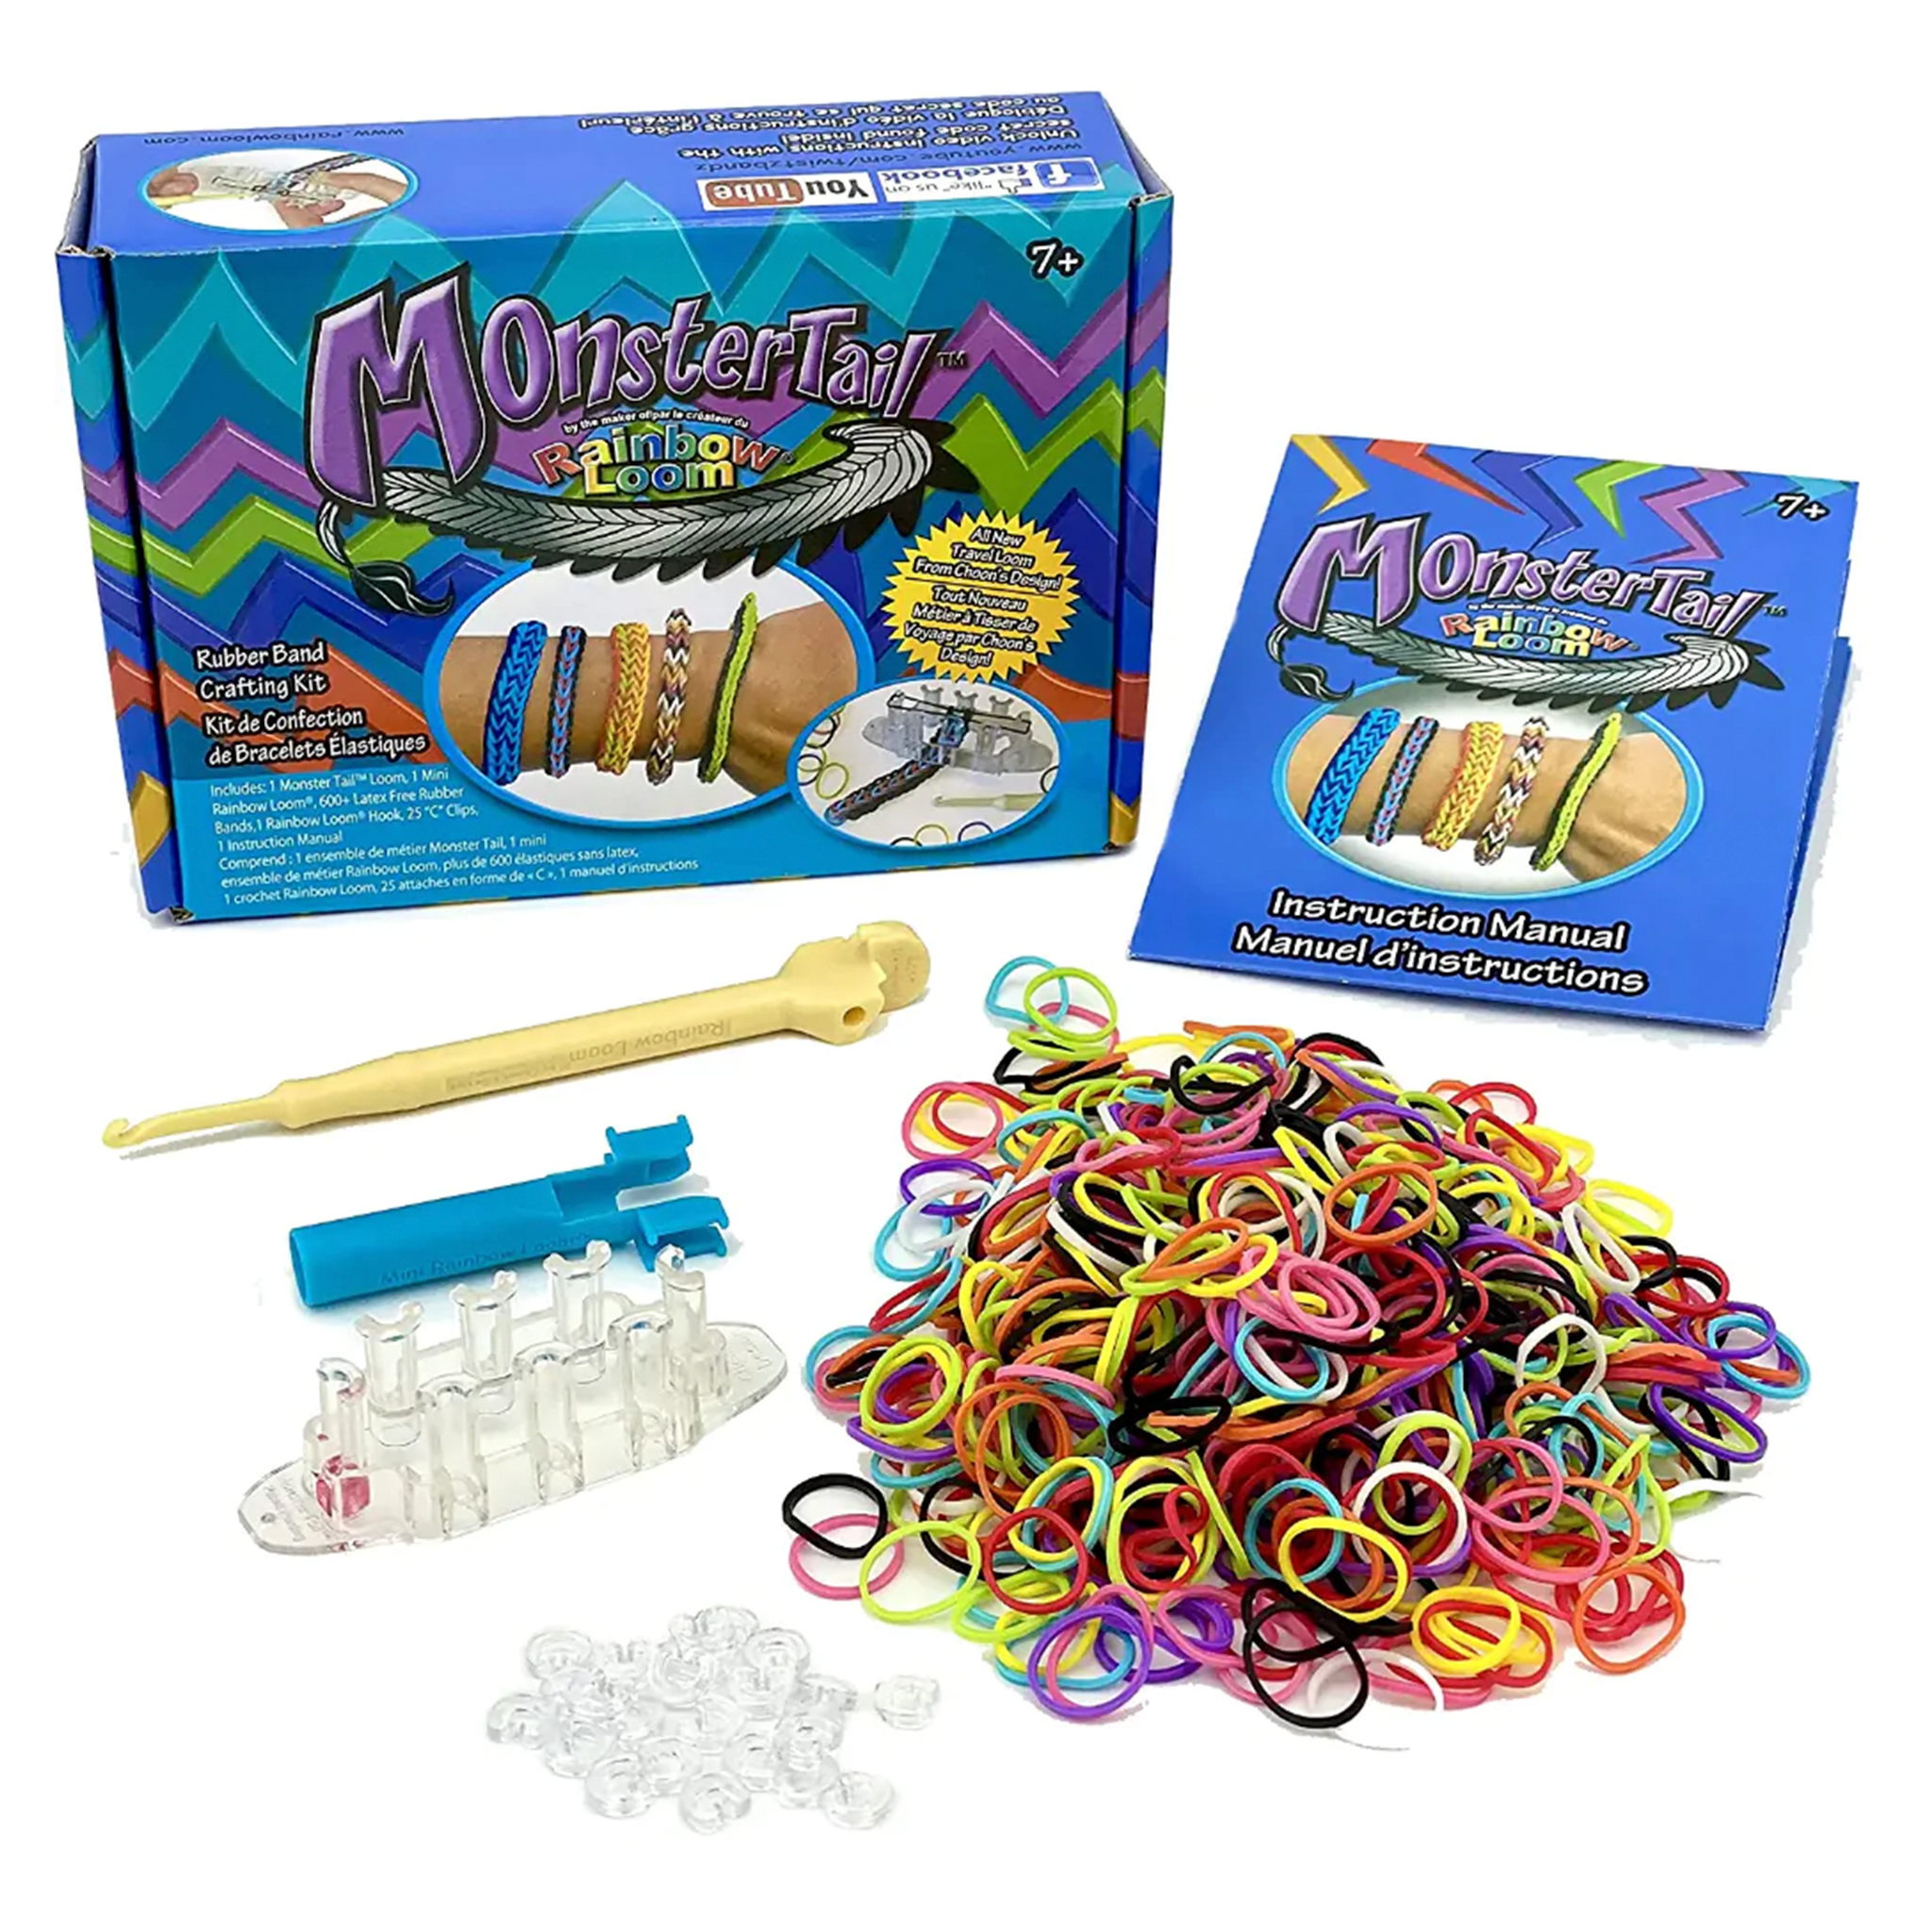 LoomBand is under construction  Rainbow loom rubber bands, Rainbow loom  bracelets easy, Rainbow loom bands